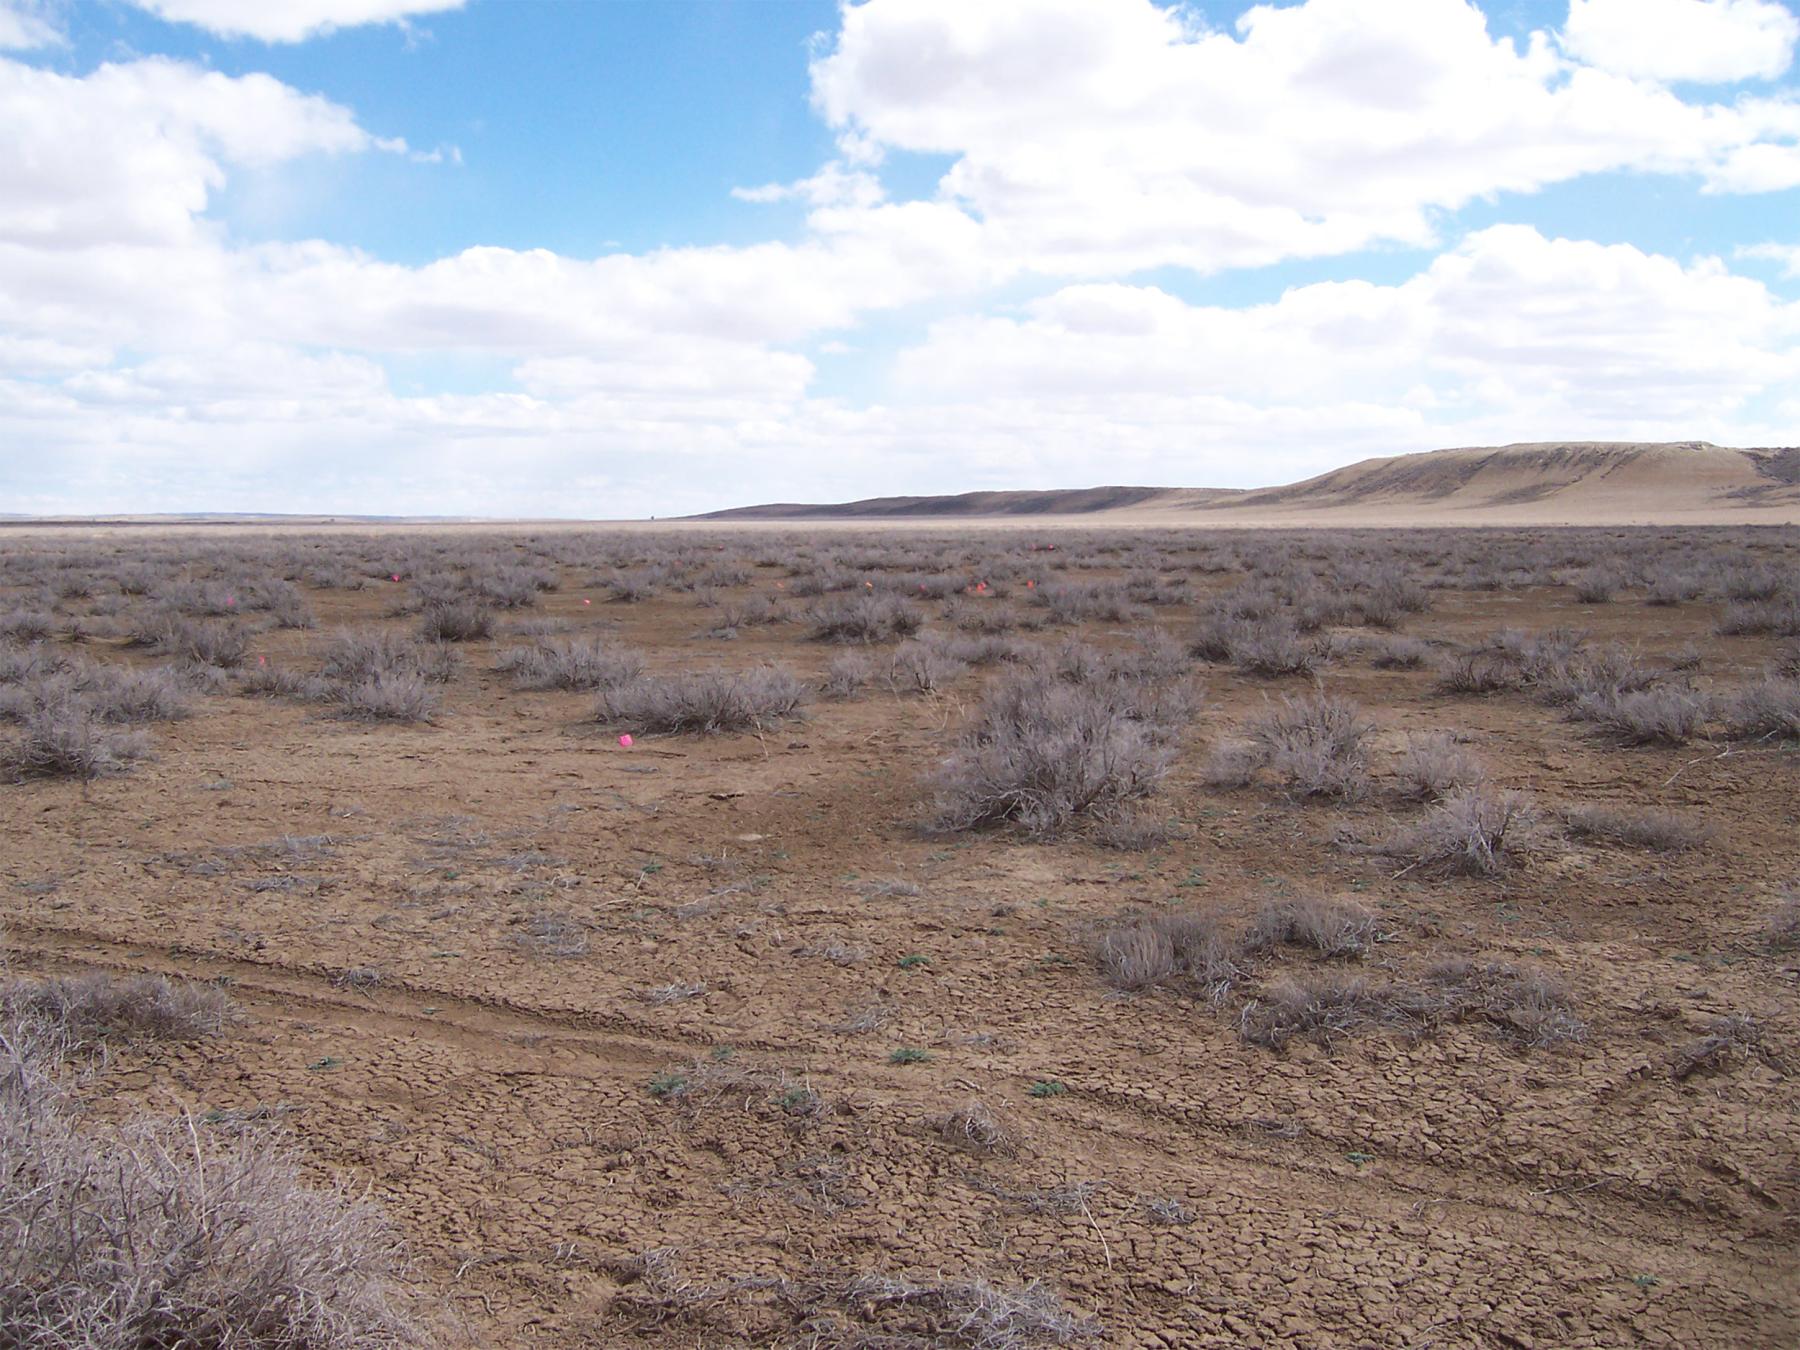 Figure 3: A dry lake bed in eastern Sweetwater County. Cherokees on the 1849 Evans Route survived on water they found in similar playa lake beds as they crossed the Red Desert. The water had been left by recent rains and would quickly evaporate. Without this water, they might not have reached the Green River. Western Archaeological Services.